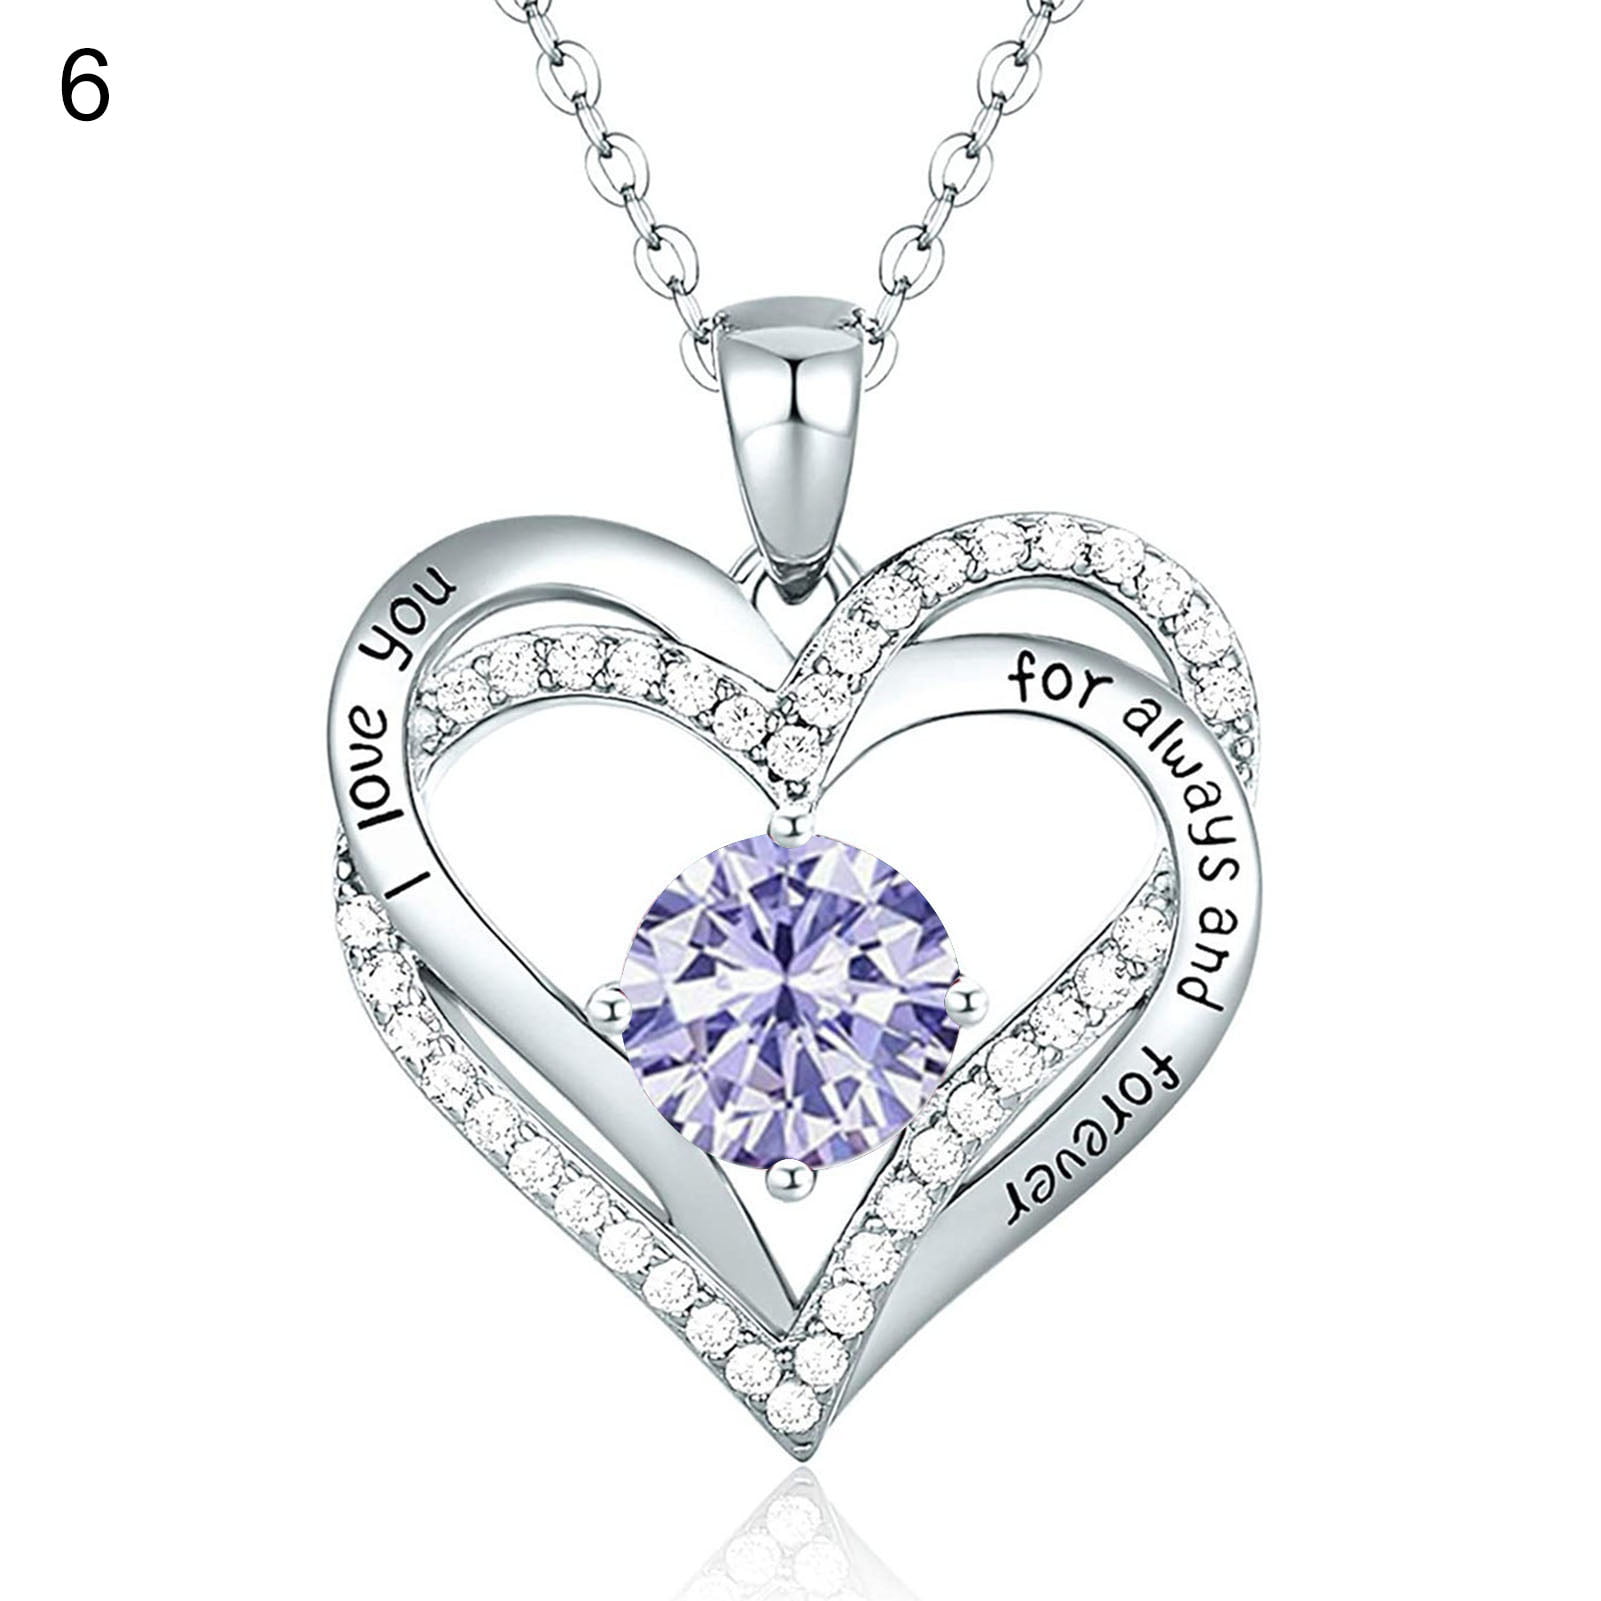 £0.99 925 Sterling Silver Heart Love Necklace Christmas Birthday Party Present 